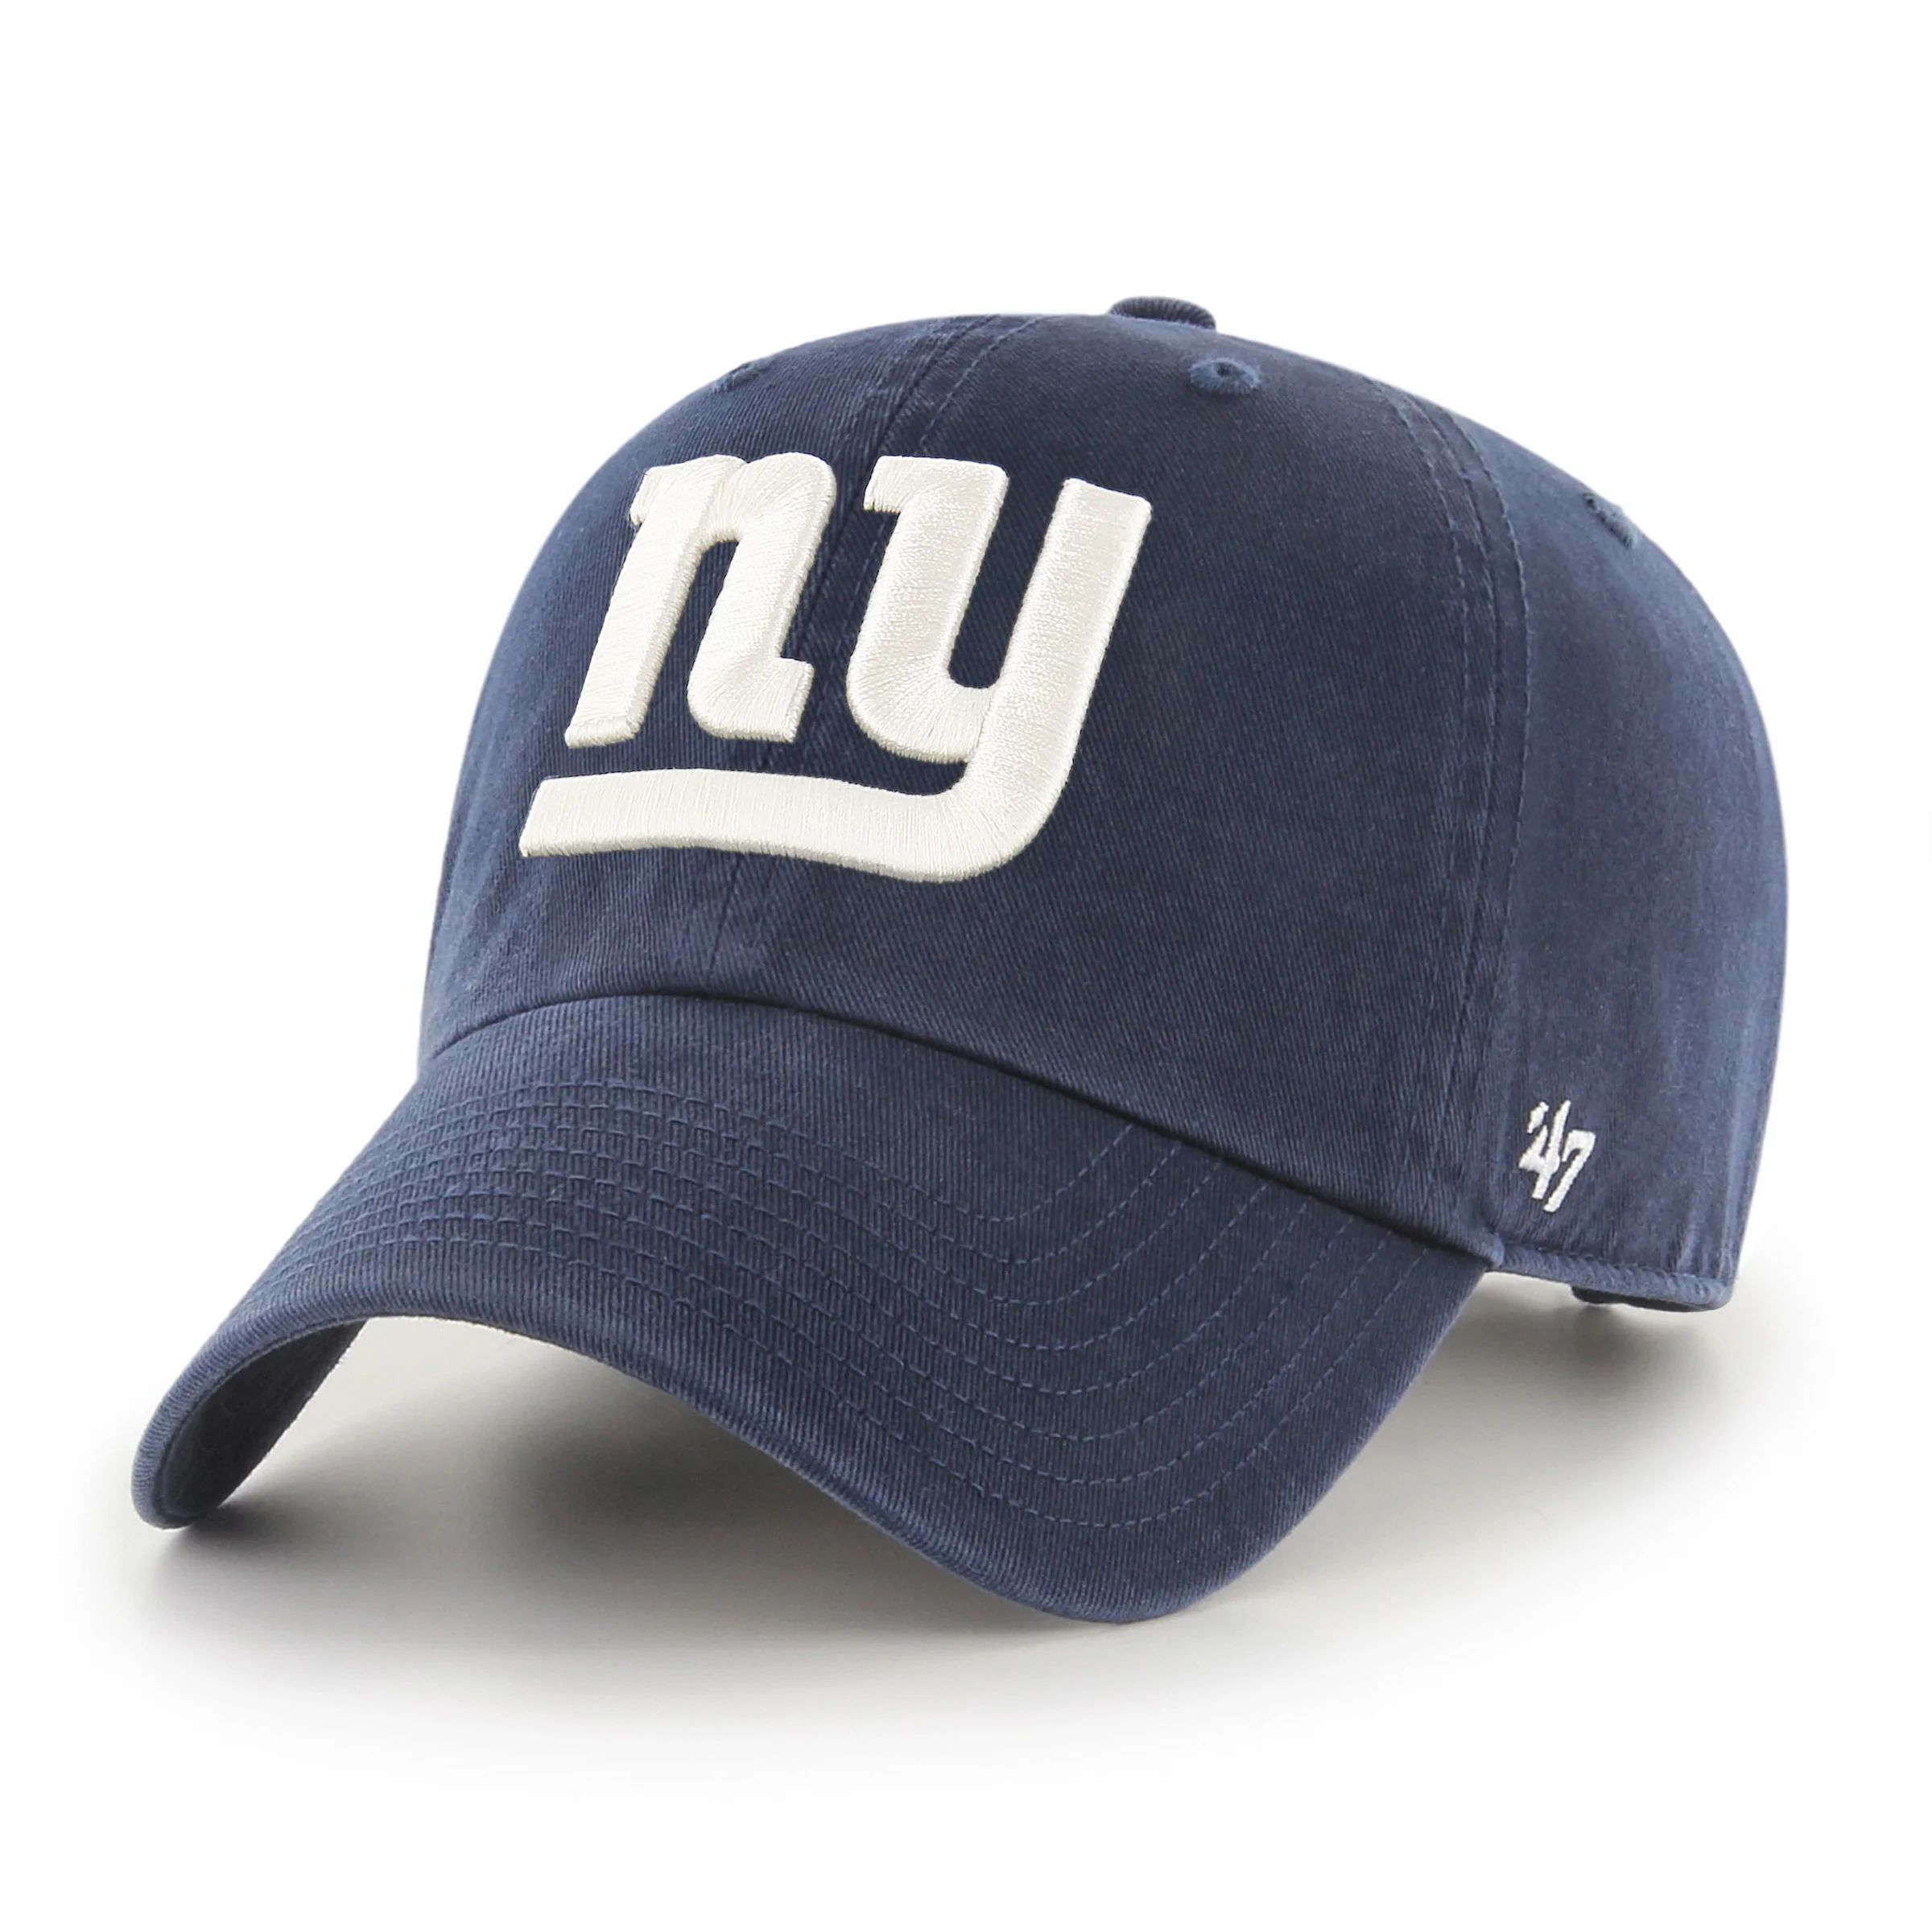 NEW YORK GIANTS LEGACY CLEAN UP | '47Brand